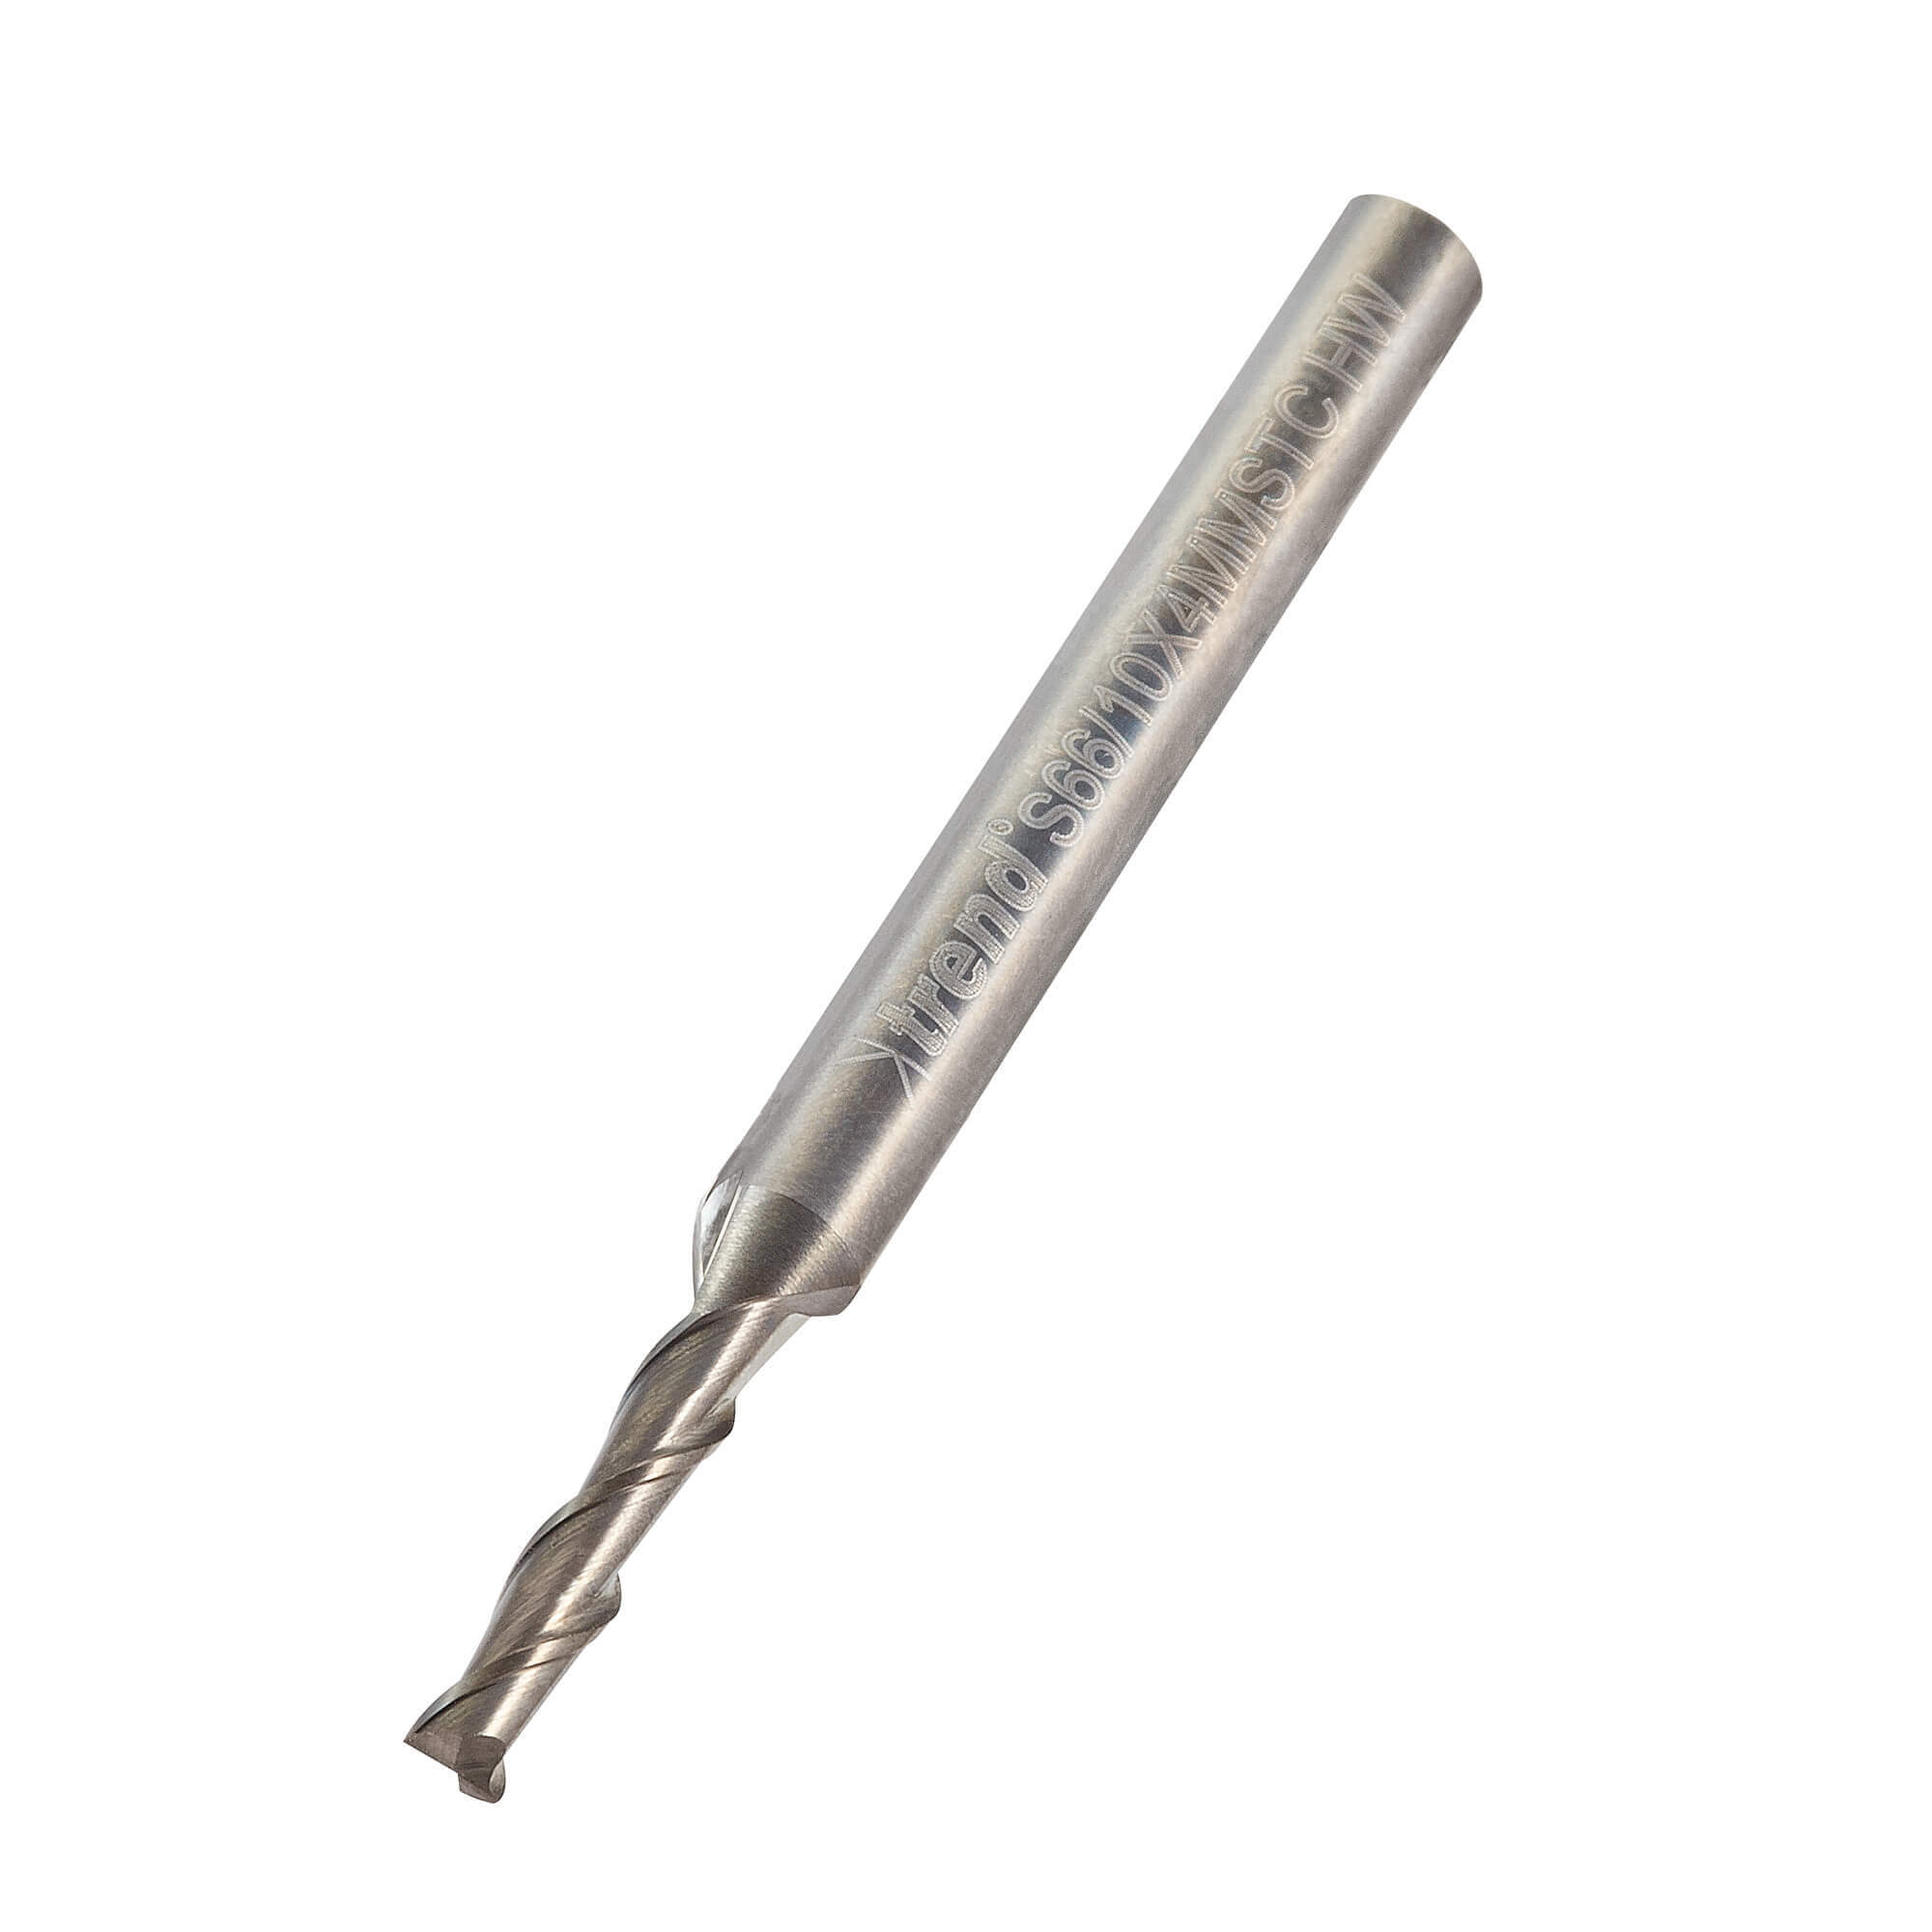 Image of Trend STC Mini Engraver End Mill Wood and Plastics 2.5mm 12mm 4mm